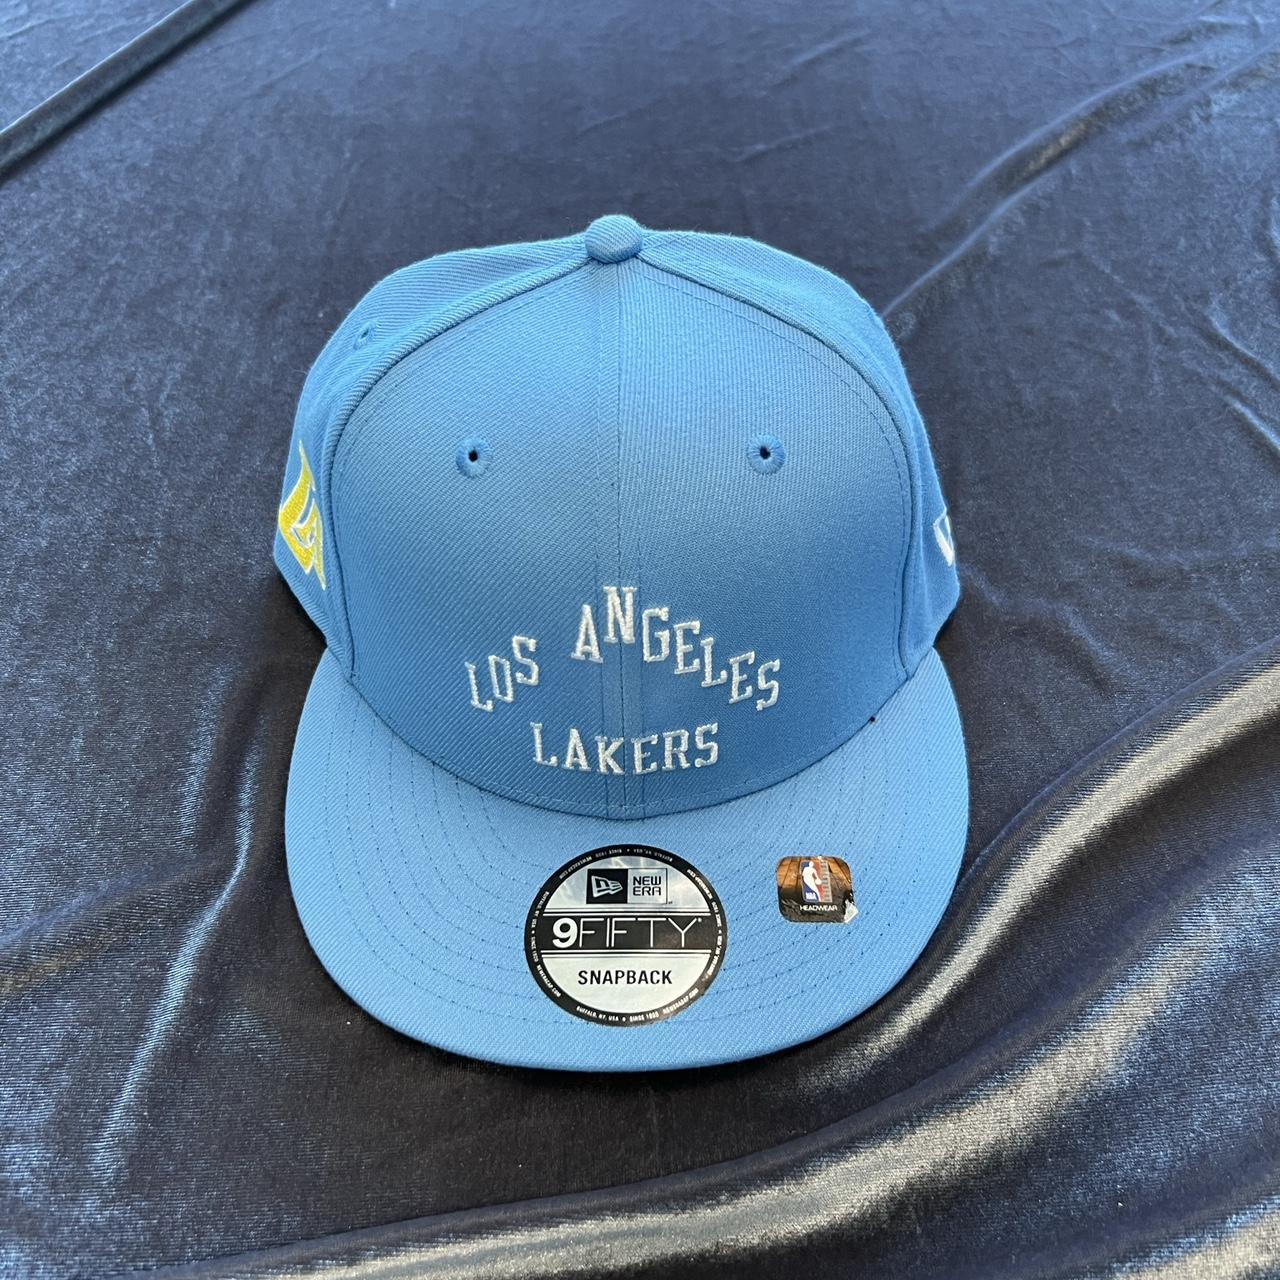 New Era City Edition Brushed Los Angeles Lakers Tee S